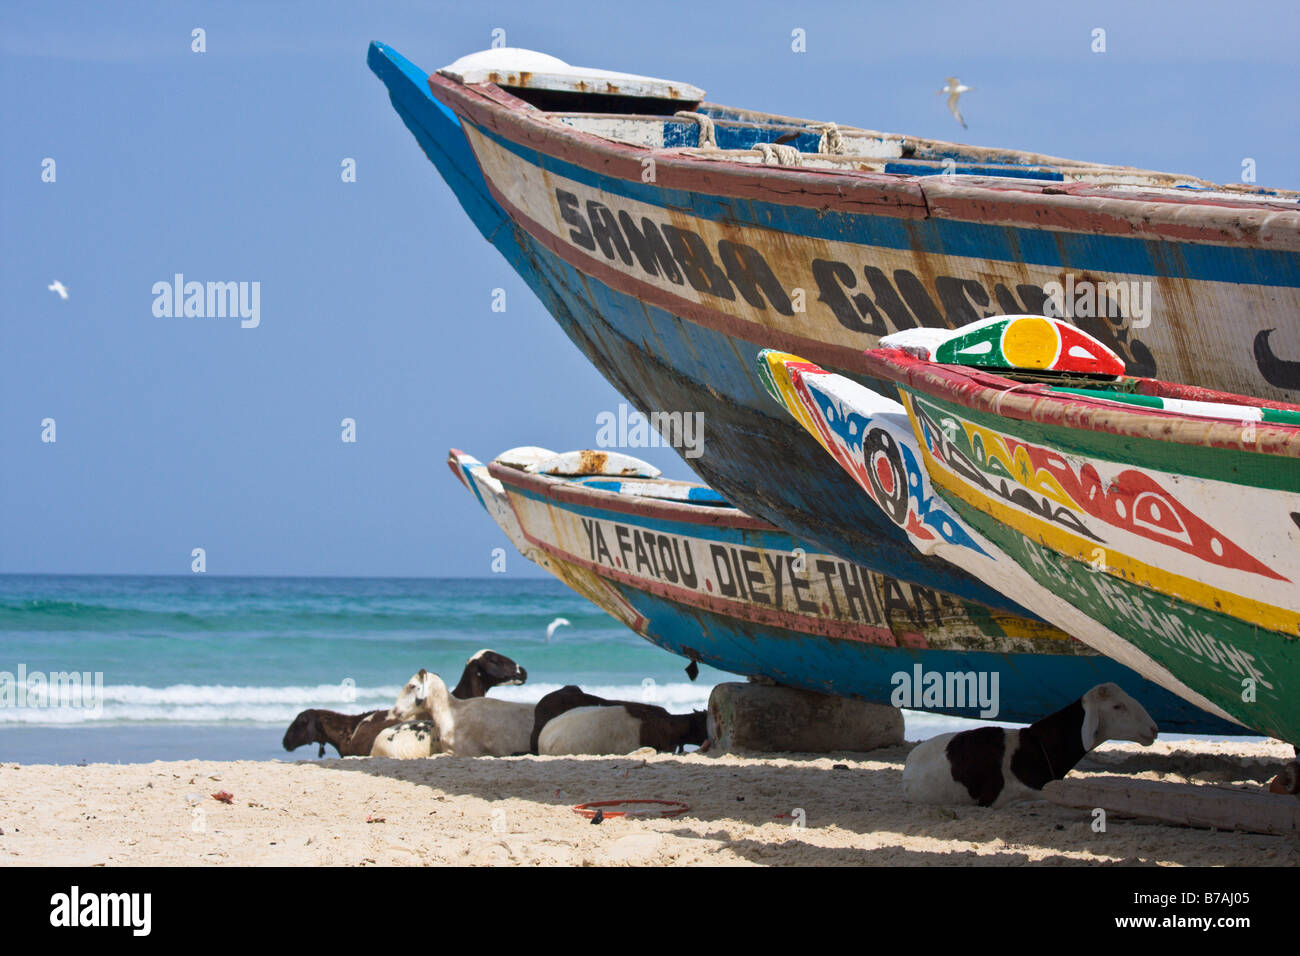 Black and white-spotted sheep and goats snooze in the shade of colorfully-painted boats that line the beach of Yoff. Stock Photo